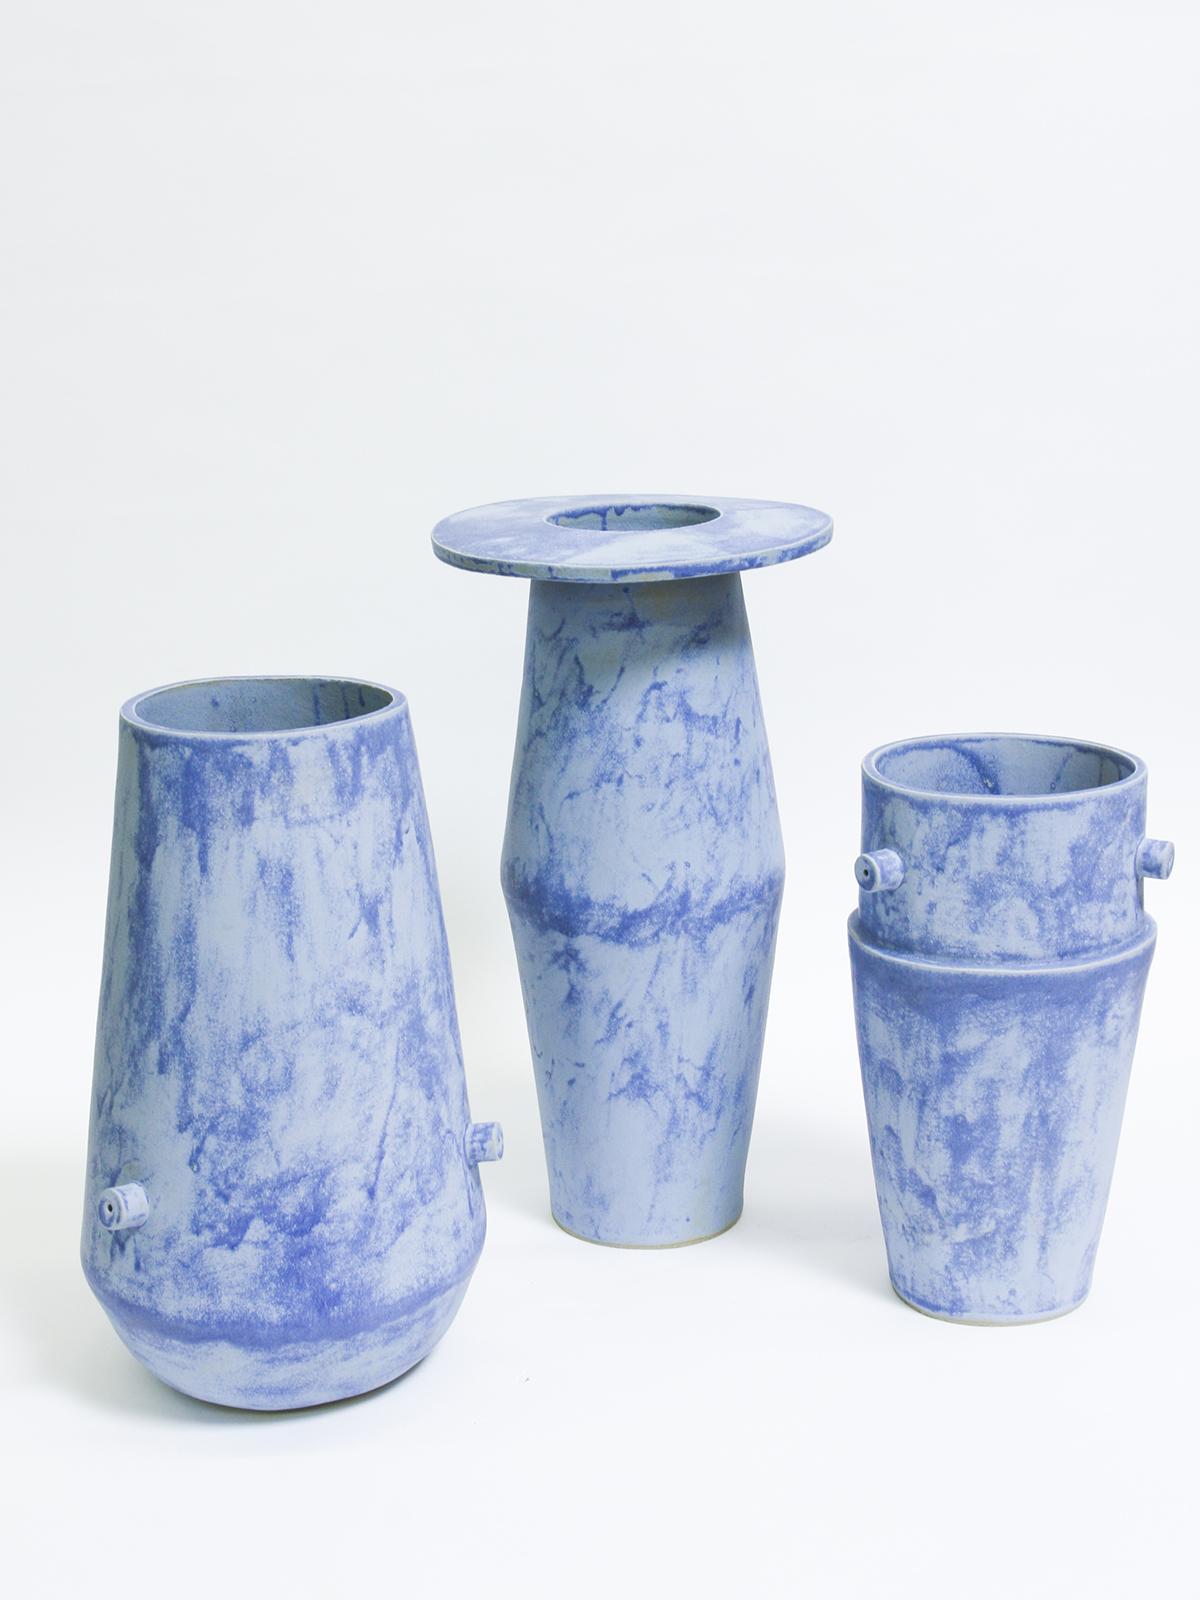 Giant bowl bottom ceramic vase in matte blue. Made to order. 

BZIPPY clay goods are one-of-a-kind stoneware / earthenware editions with variations in glazes depending on the high fire process. Please note that works are unique and not exactly the